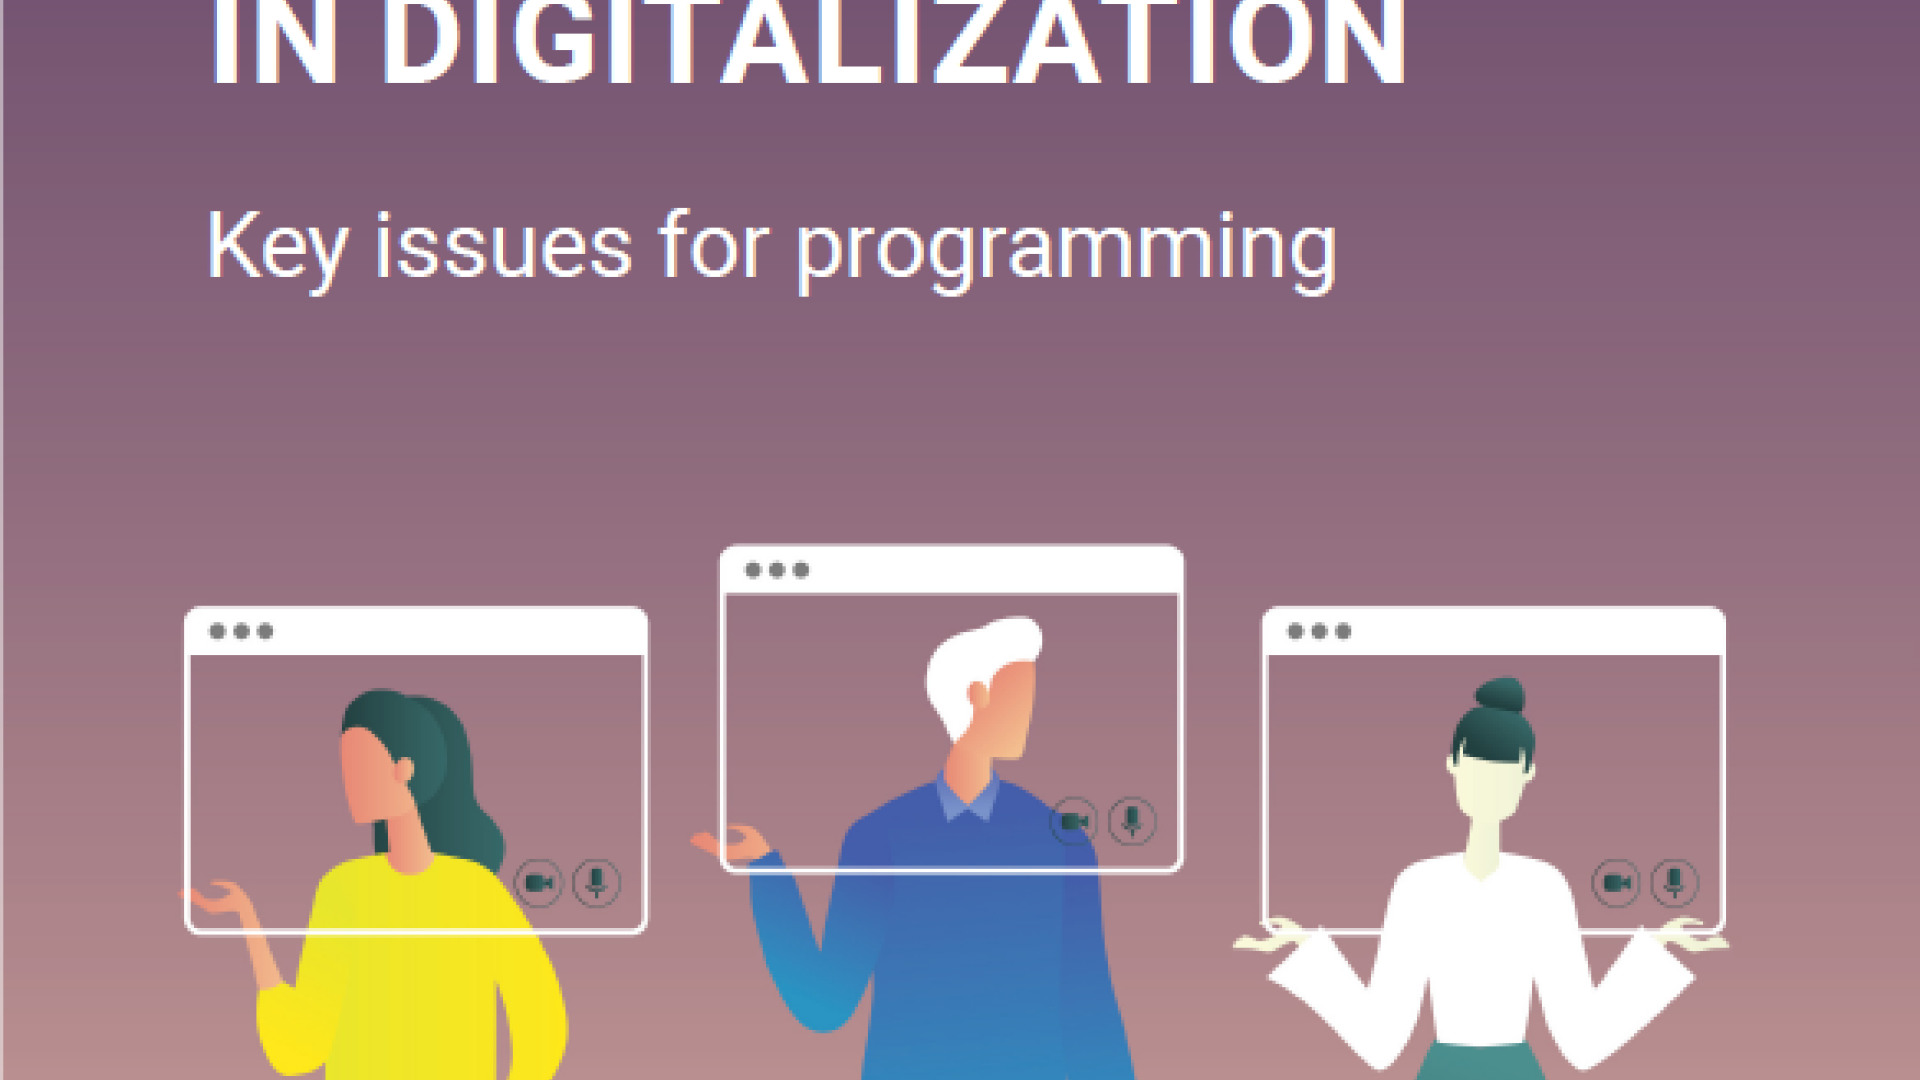 Equality in Digitalization | United Nations Development Programme